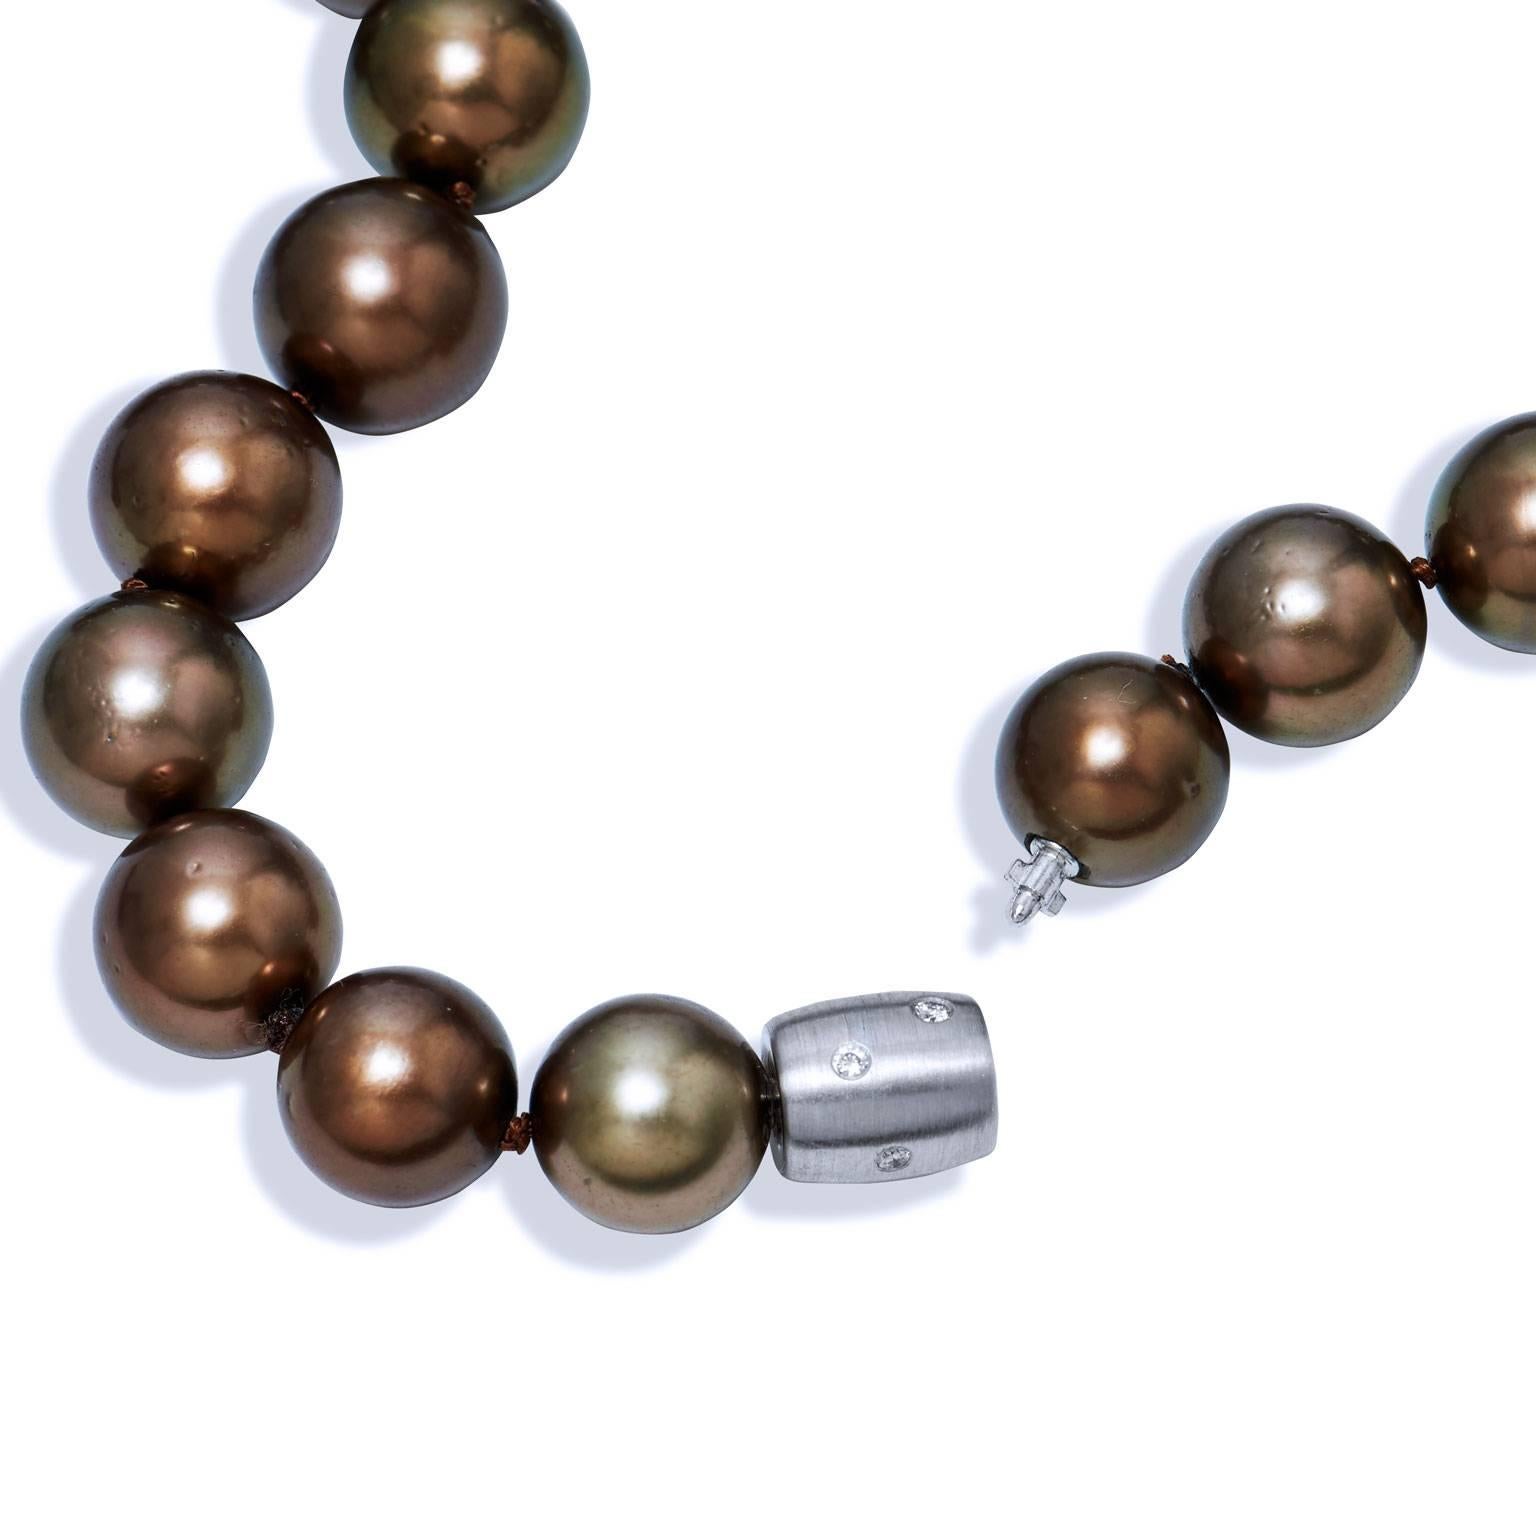 H&H 18 Inch Chocolate Tahitian Pearl Necklace with 18 Karat Diamond Clasp

This is a one of a kind, handmade pearl necklace created by H&H Jewels. 

This necklace is comprised of thirty-seven Tahitian pearls, measuring 10-11.9 millimeters each. 